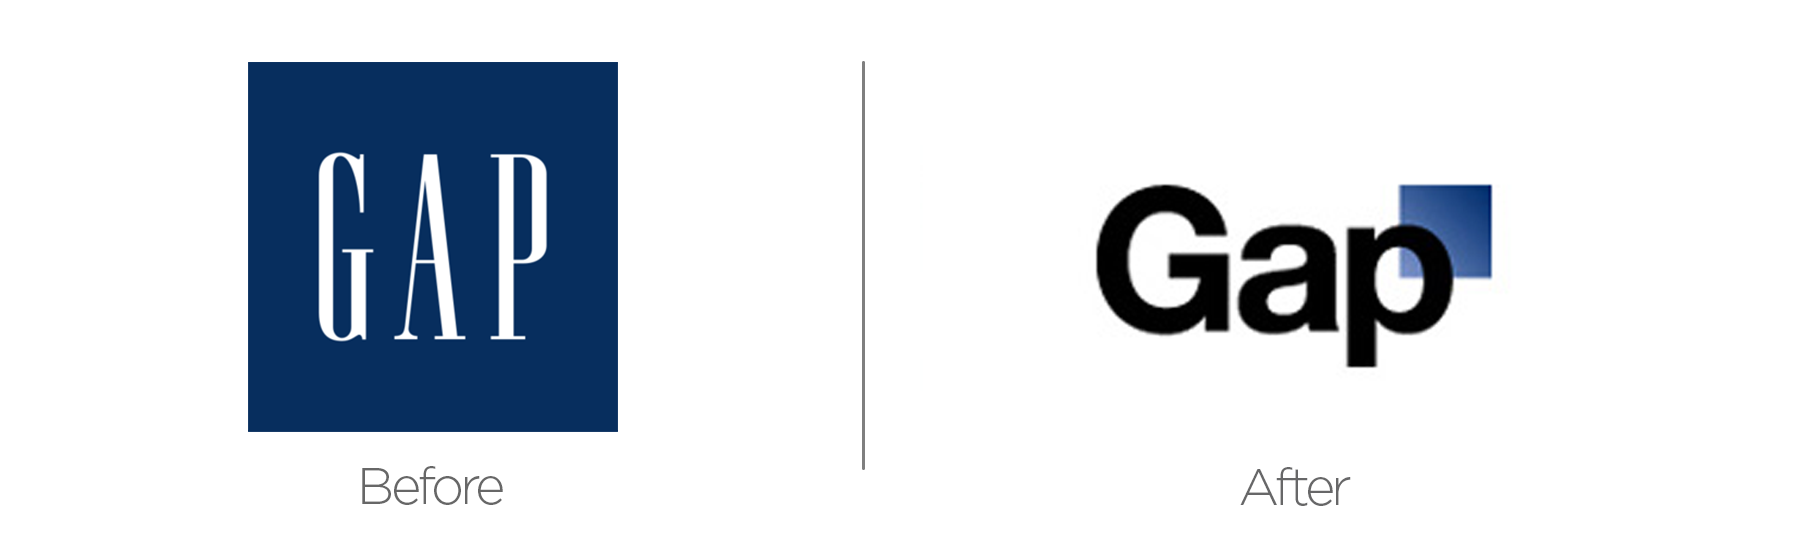 Gap rebrand before and after